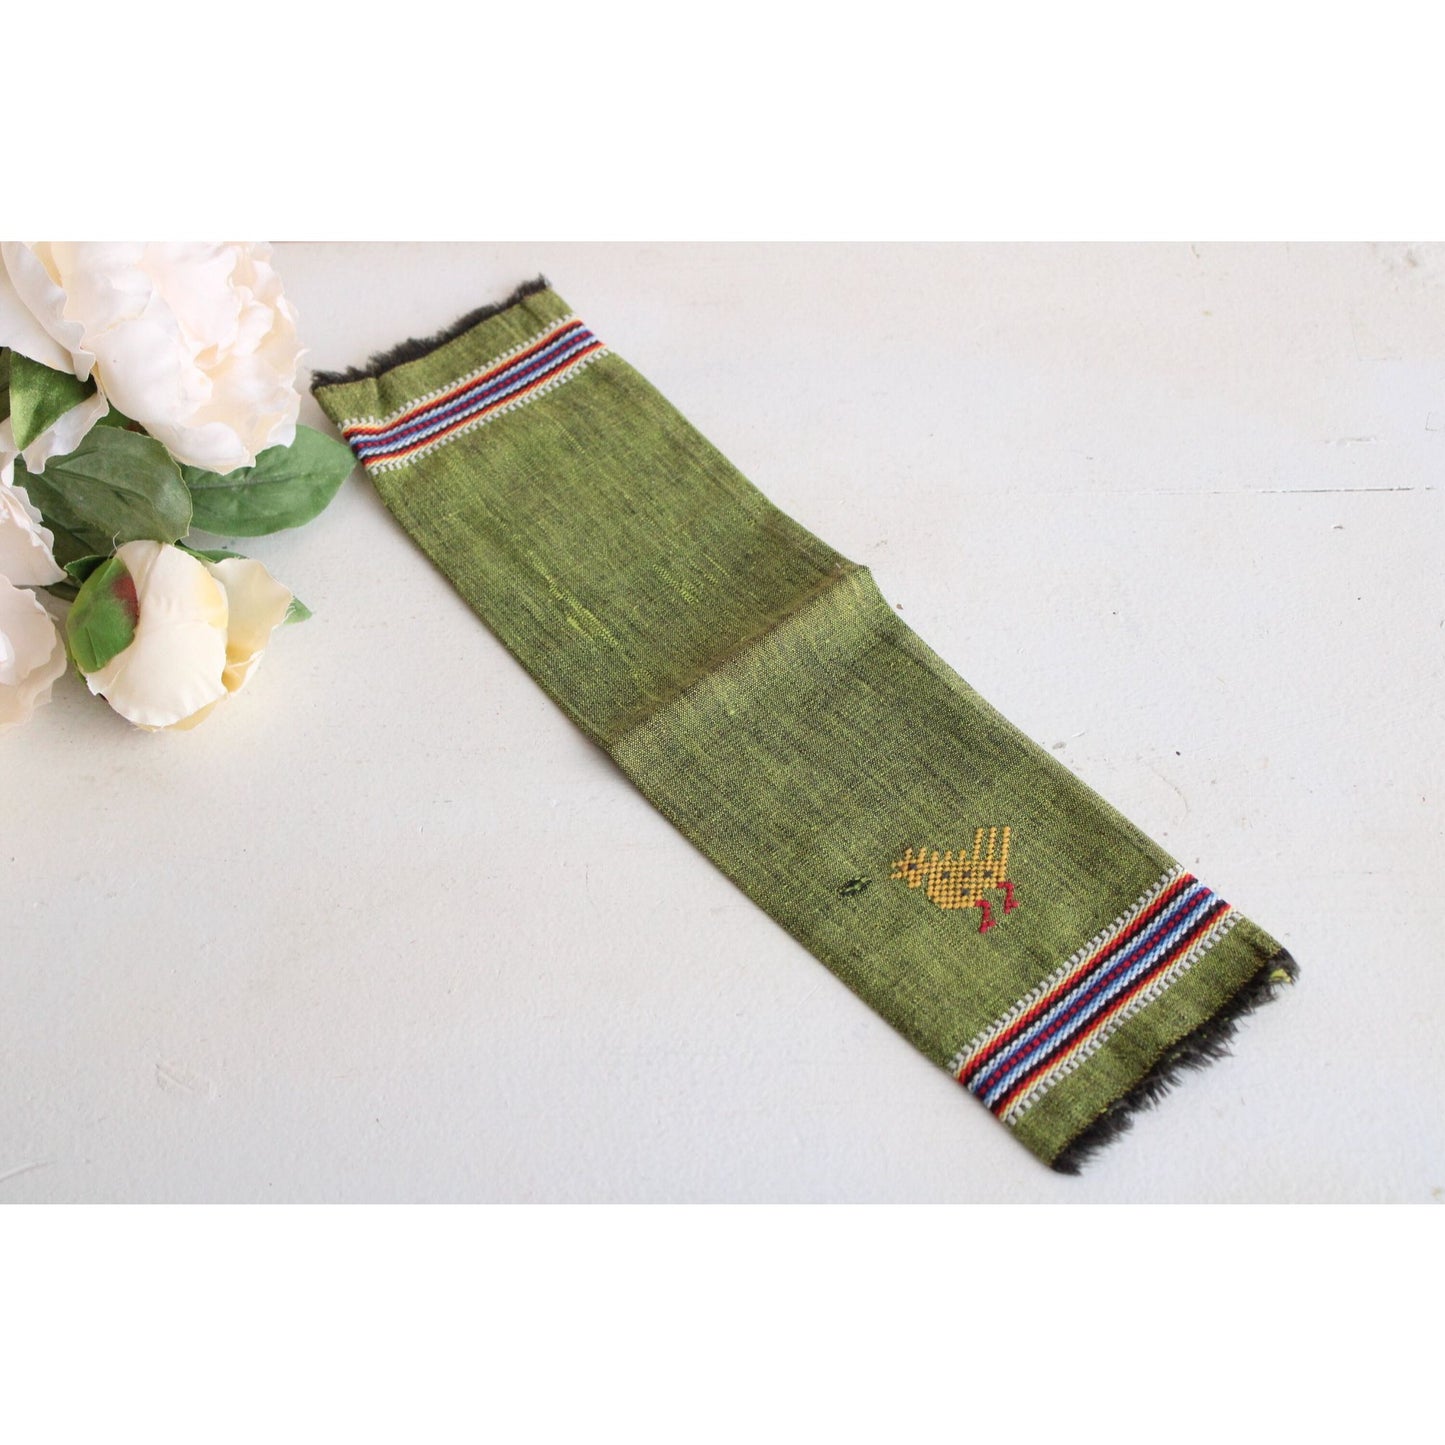 Vintage 1960s Green Linen Fingertip Towel with Embroidered Chicken and Fringe